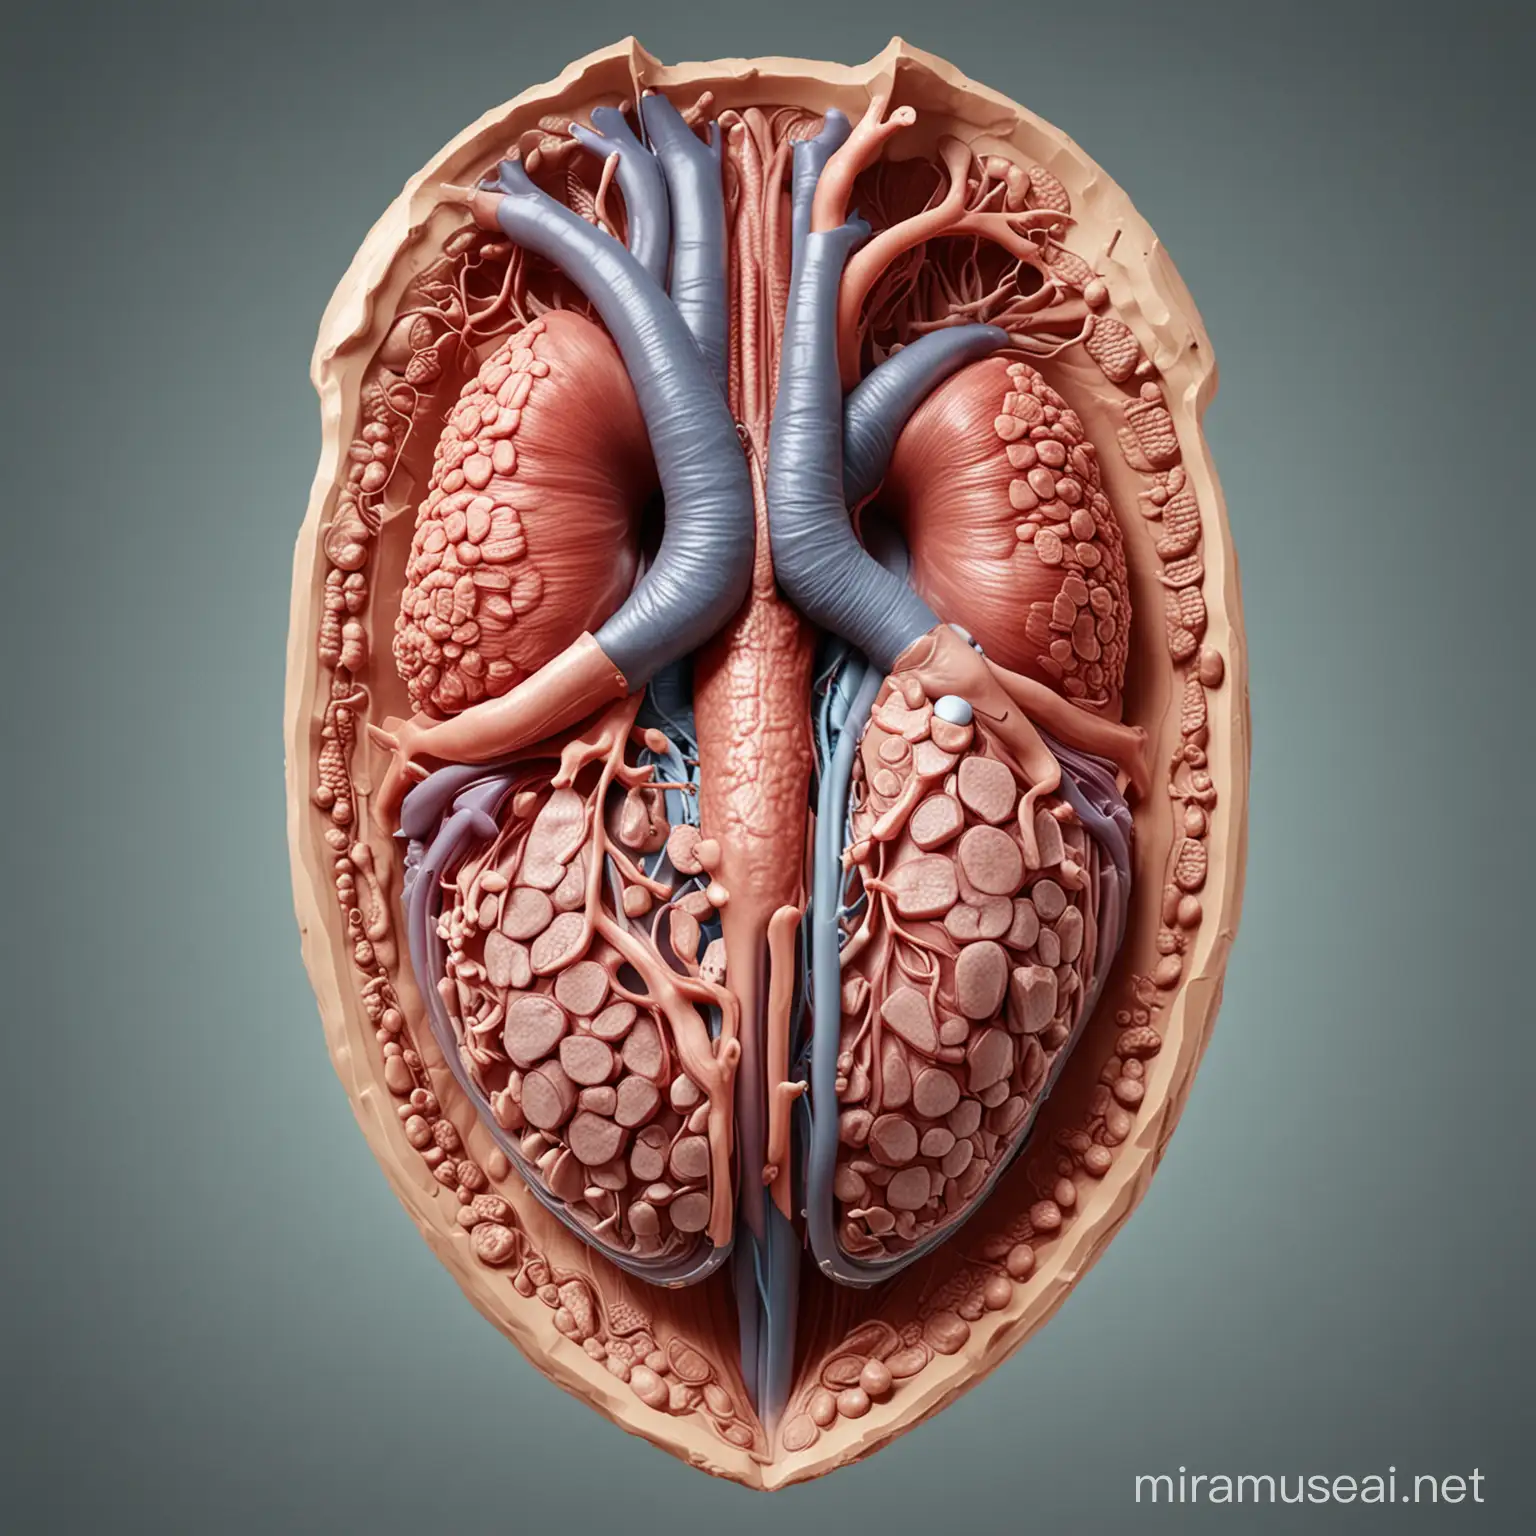 I need your help in designing a PNG photo of the kidney organ with surrounding glands in a shield for protection that looks like 3d ultra-model